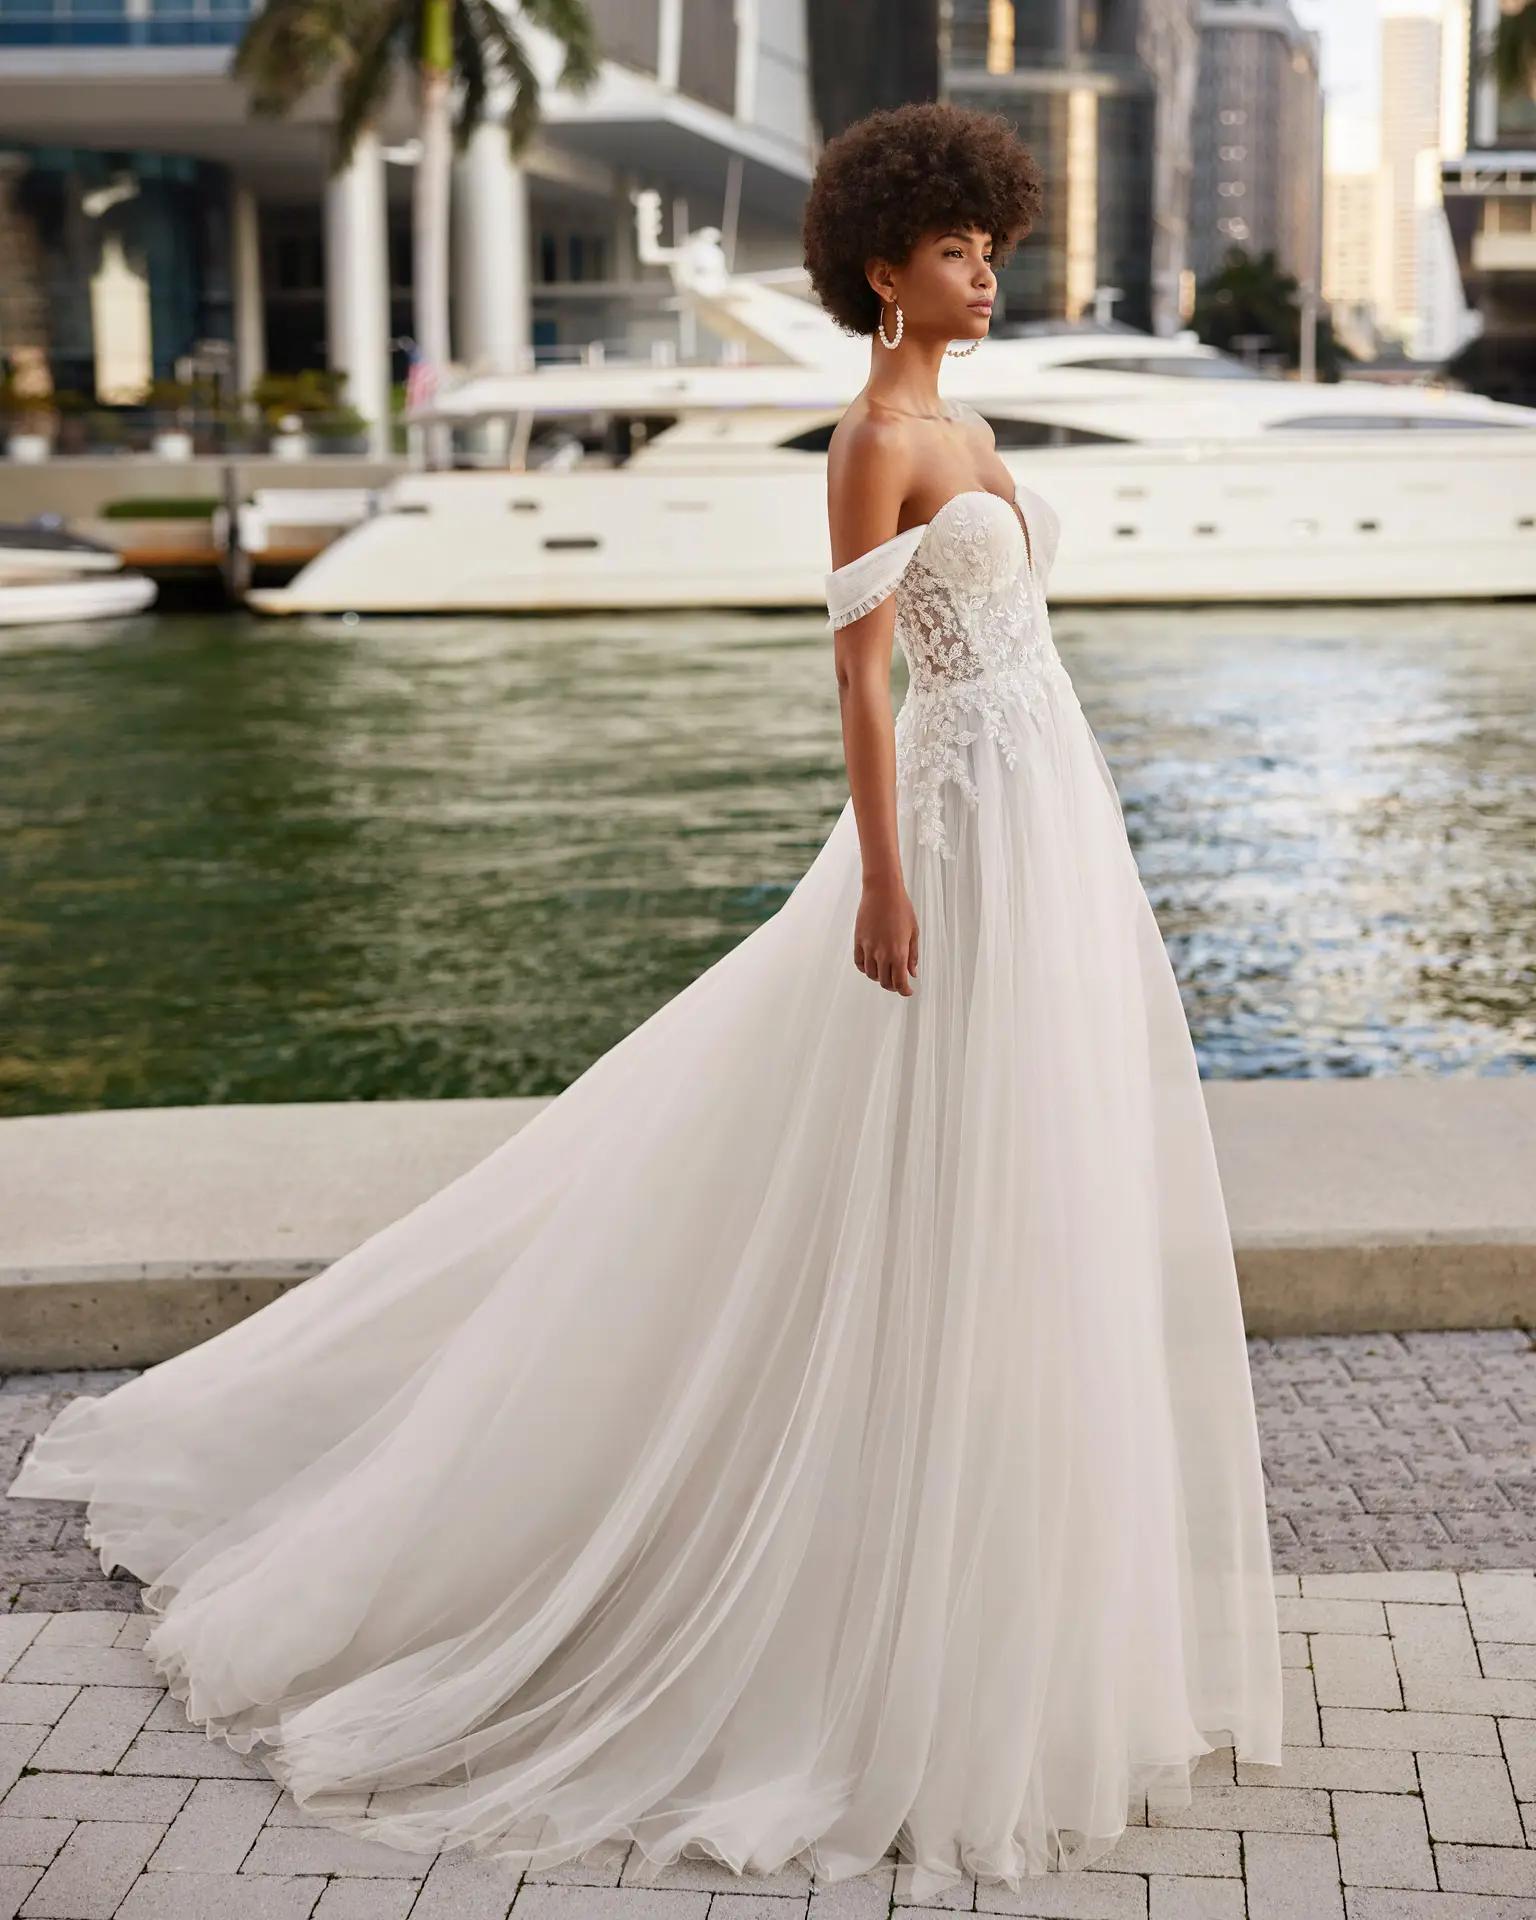 Killian wedding dress by Rosa Clara in Columbus, Ohio with off the shoulder details, flowy skirt and lace on corset bodice